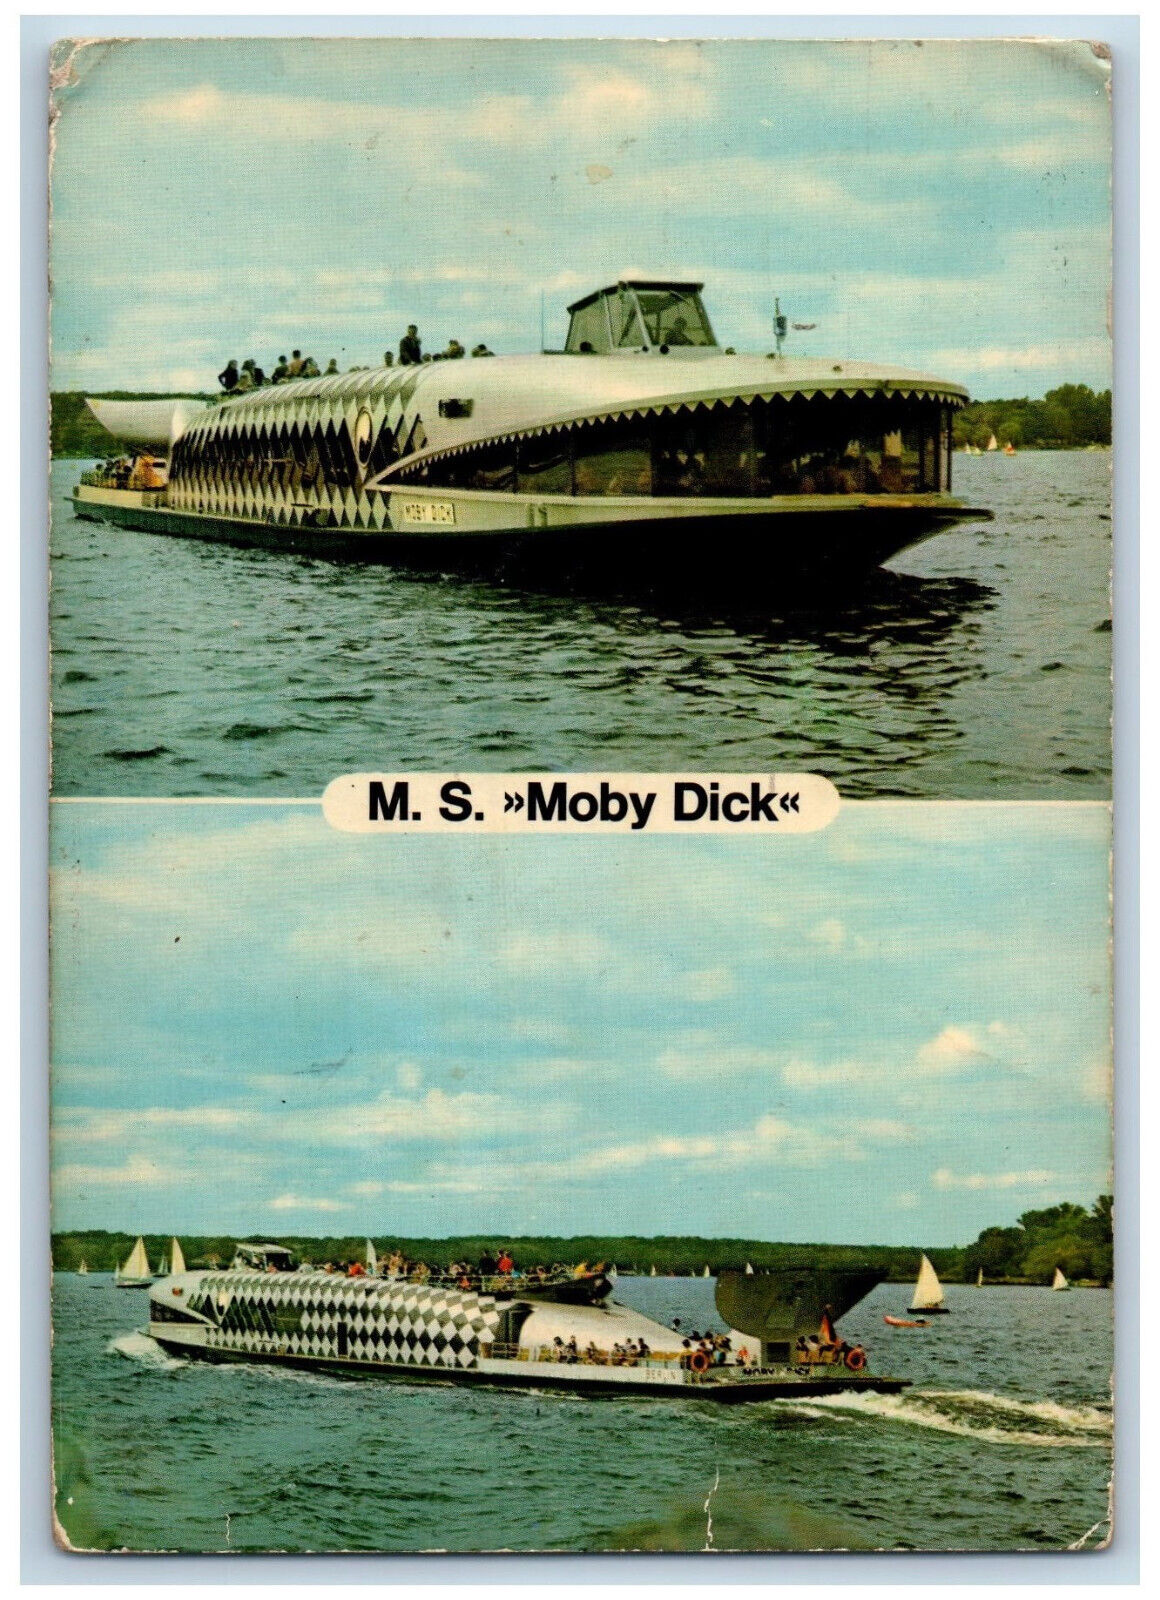 Berlin Germany Postcard M.S. Moby Dick Excursion Boat c1970's Vintage